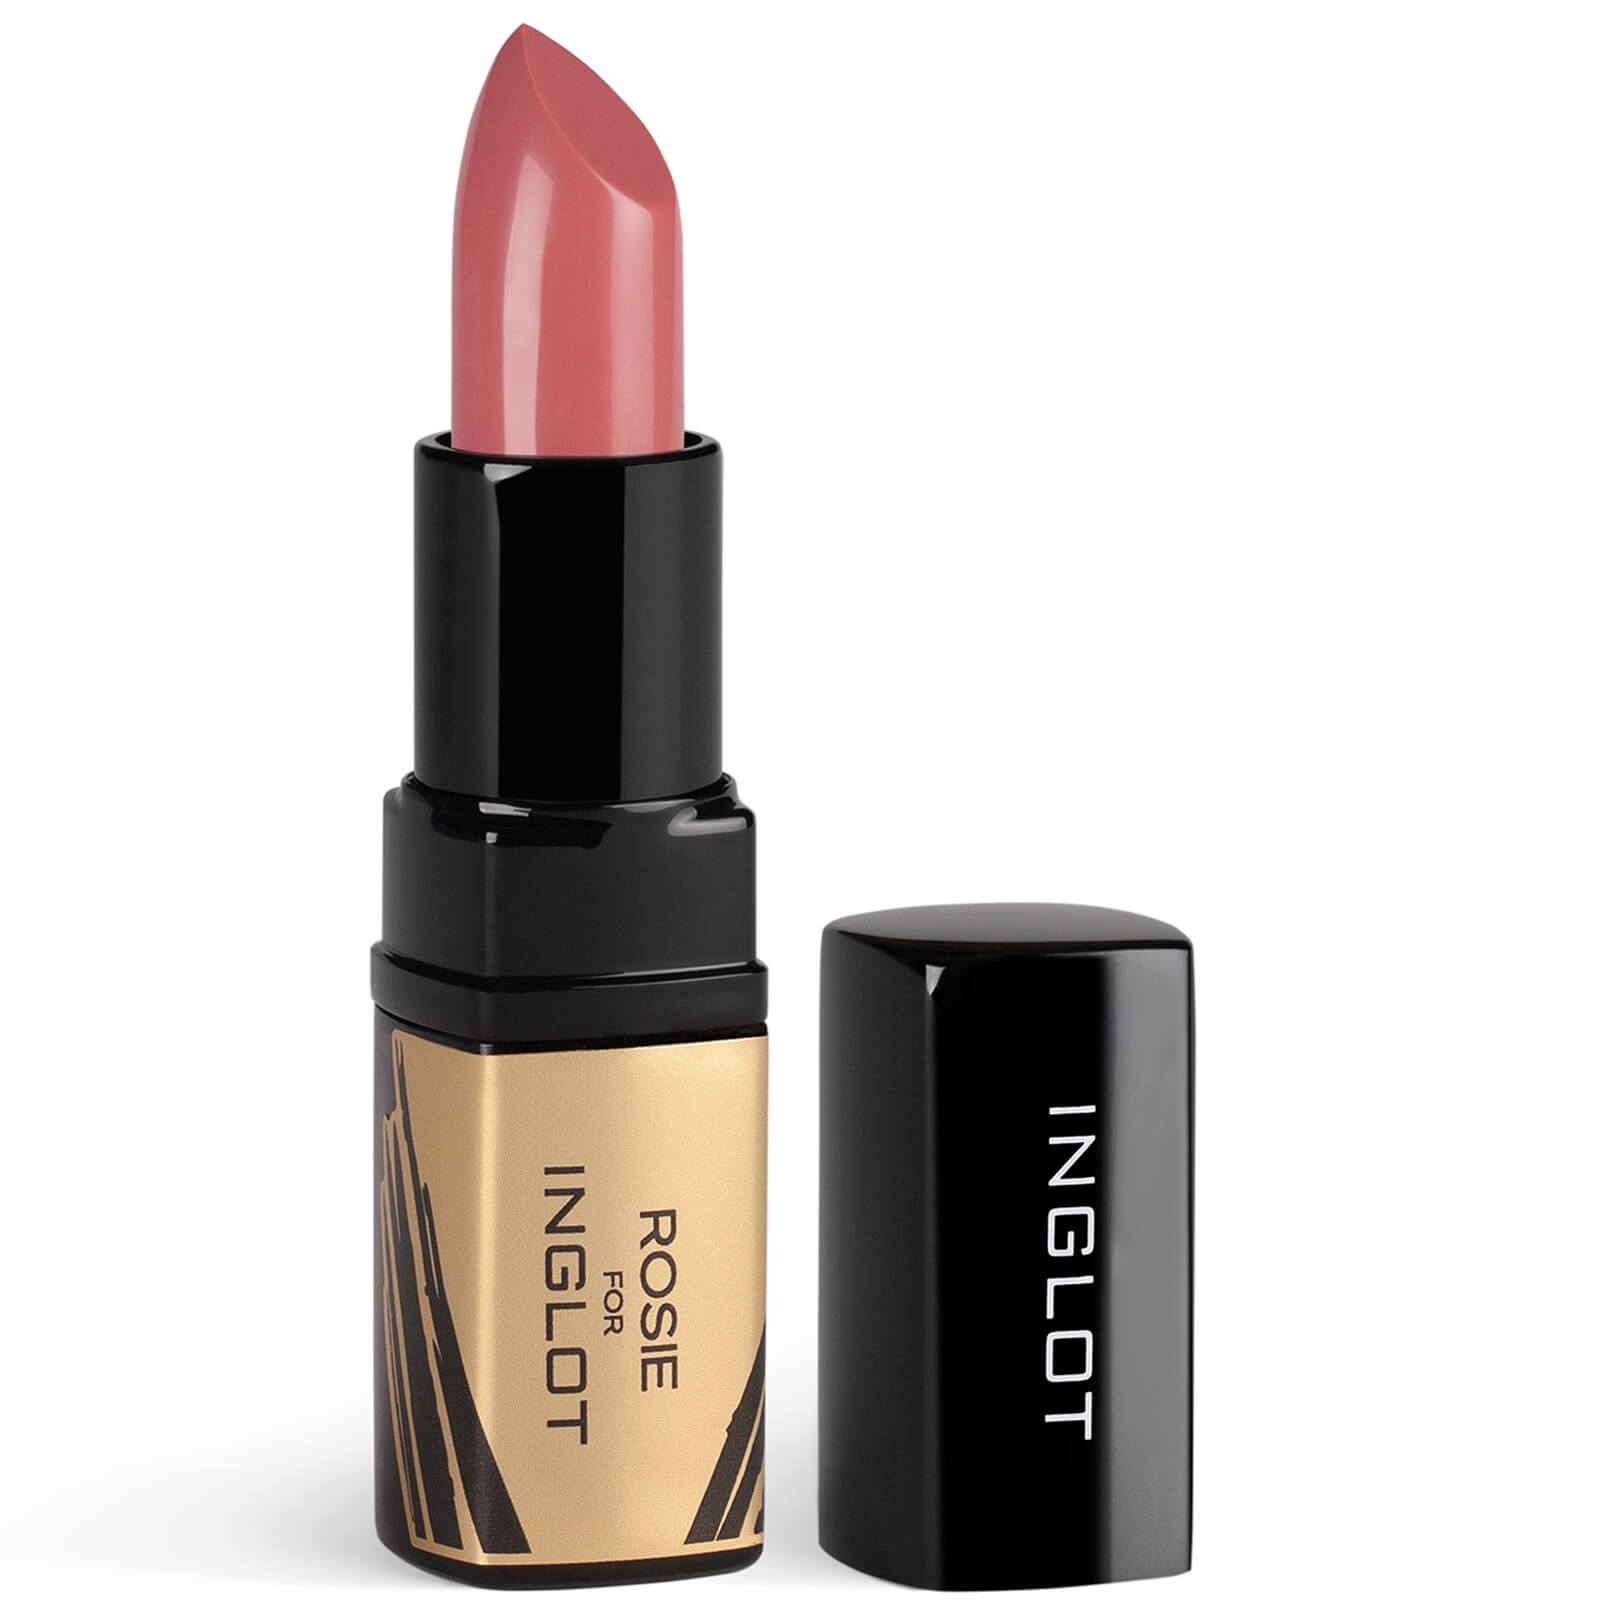 Inglot Rosie for Inglot Dreamy Creamy Lipstick 4g (Various Shades) - Dreamy Peach